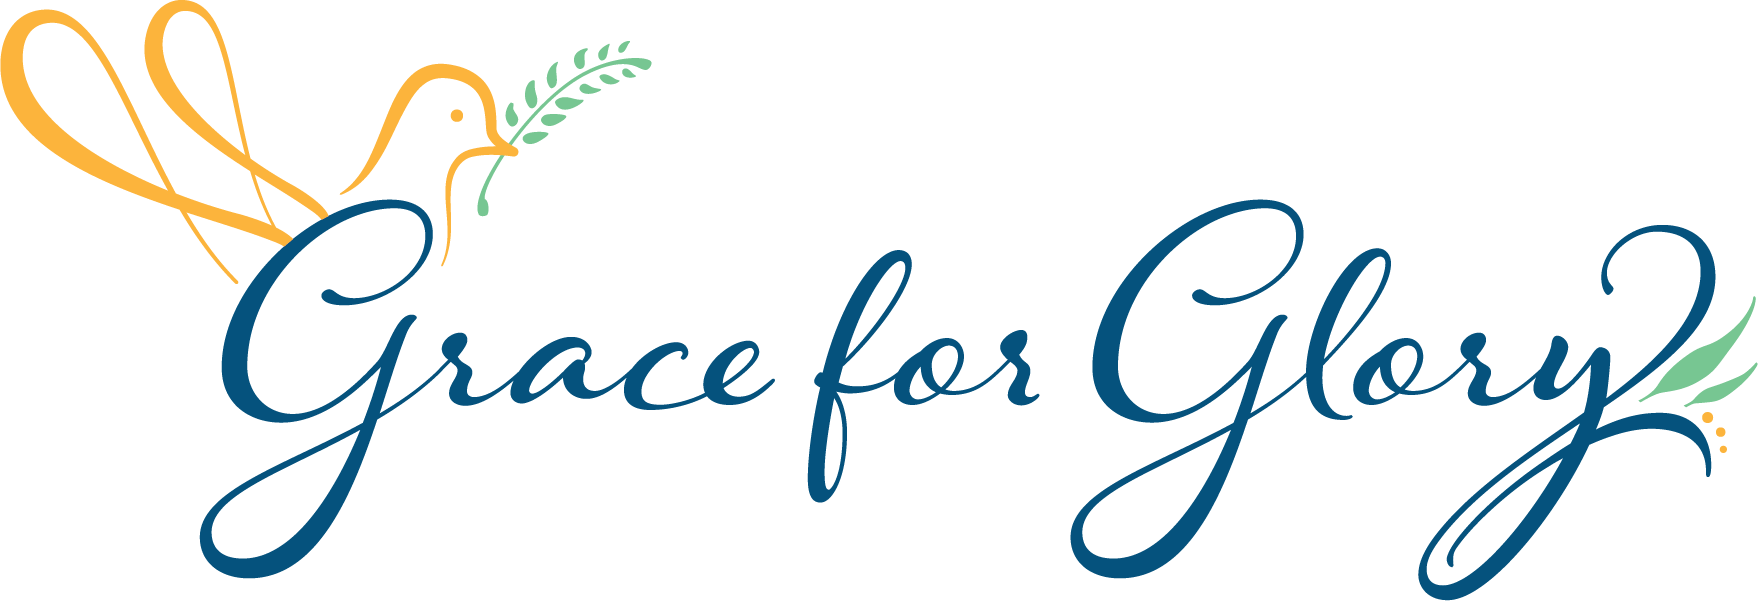 Grace For Glory